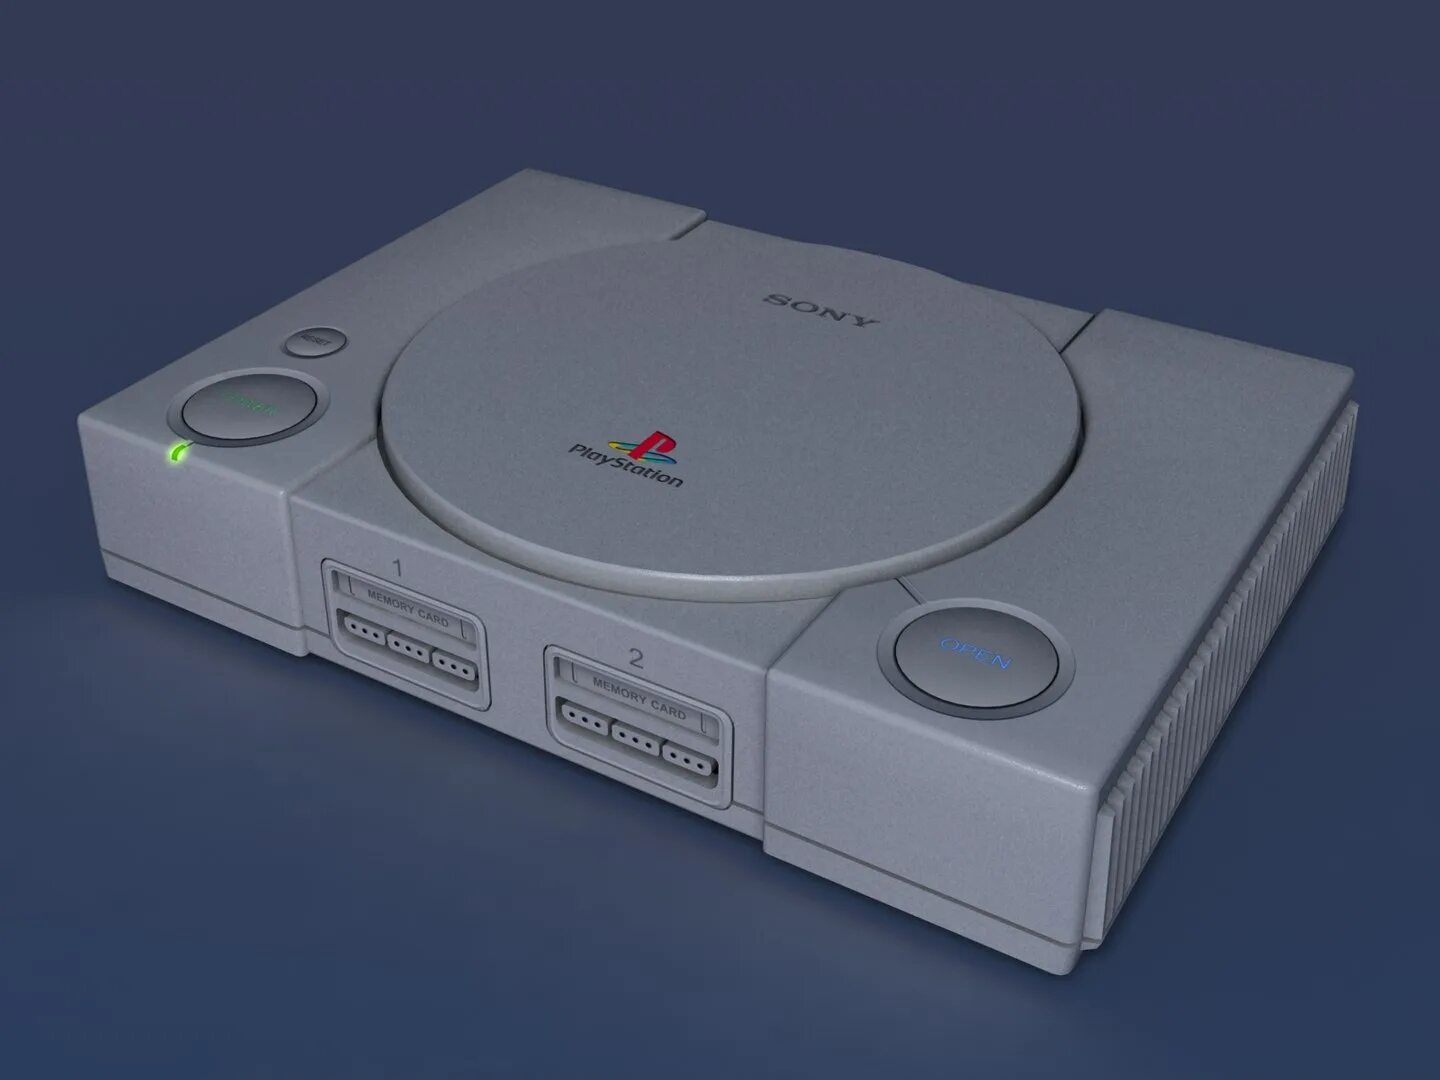 Playstation ps1. Sony PLAYSTATION ps1. Sony PLAYSTATION 1 1994. Ps1 SCPH 5903. Sony ps1 1994.